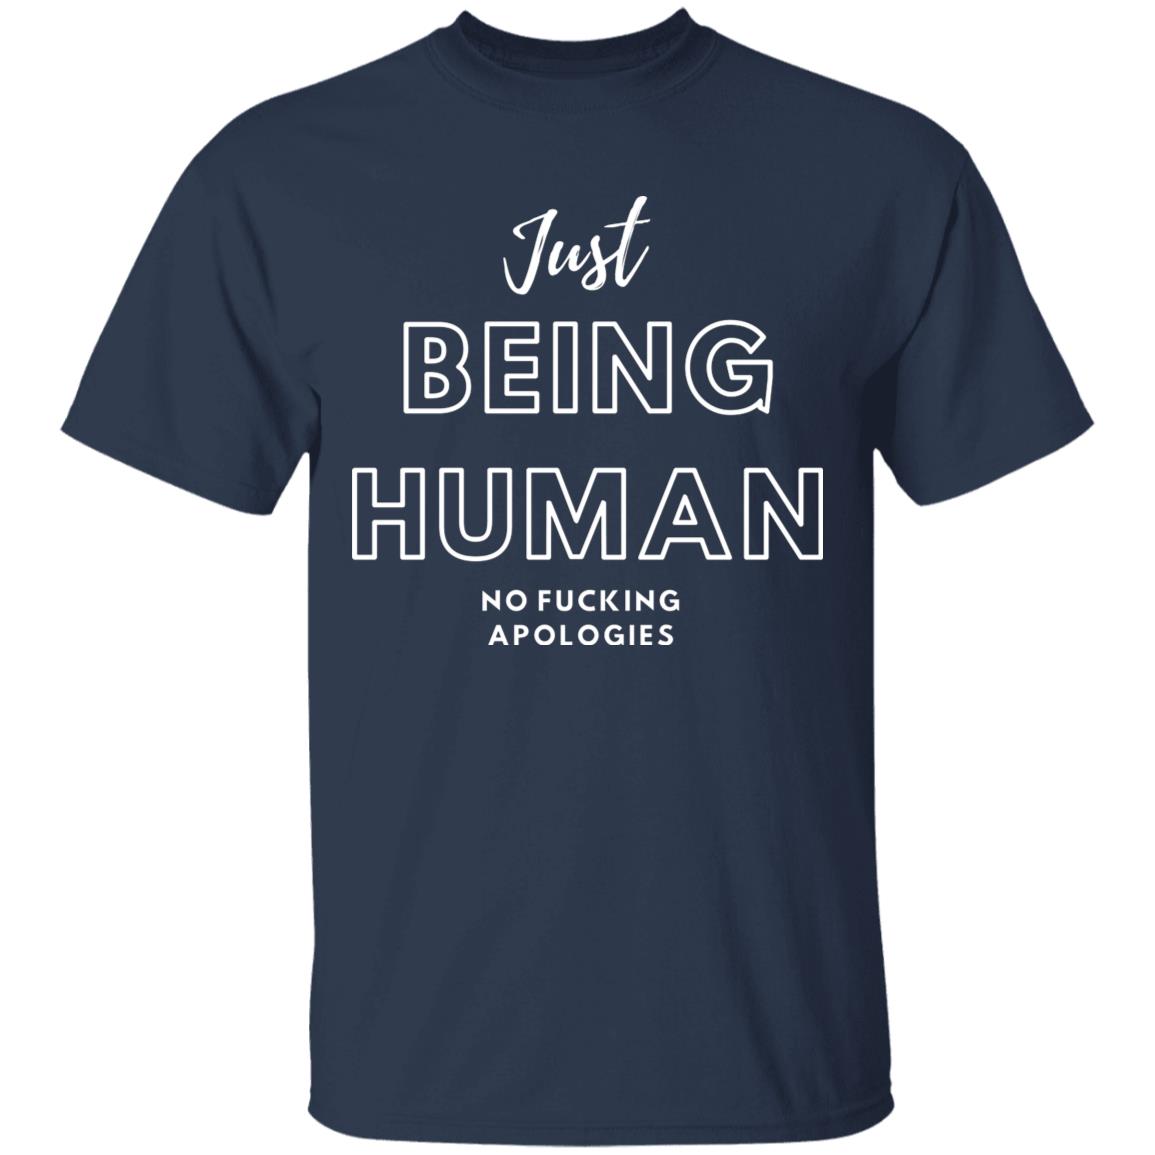 Just being Human T-Shirt